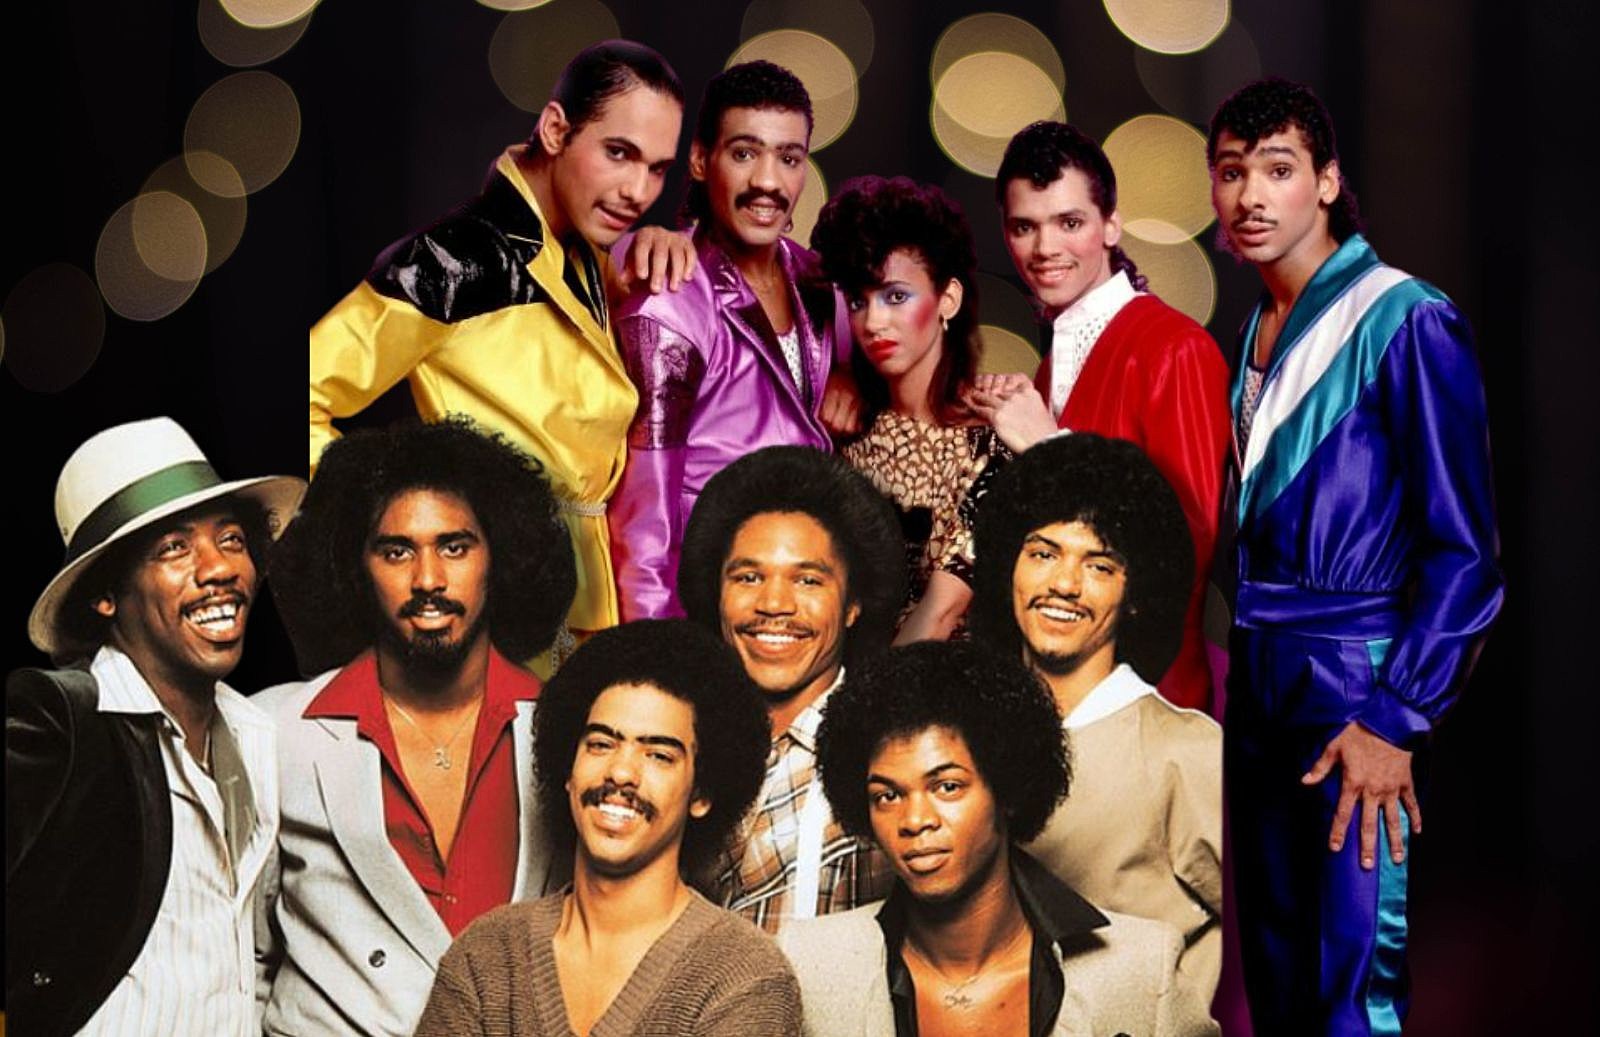 Grand Rapids' Legendary R&B Groups: Switch and Debarge